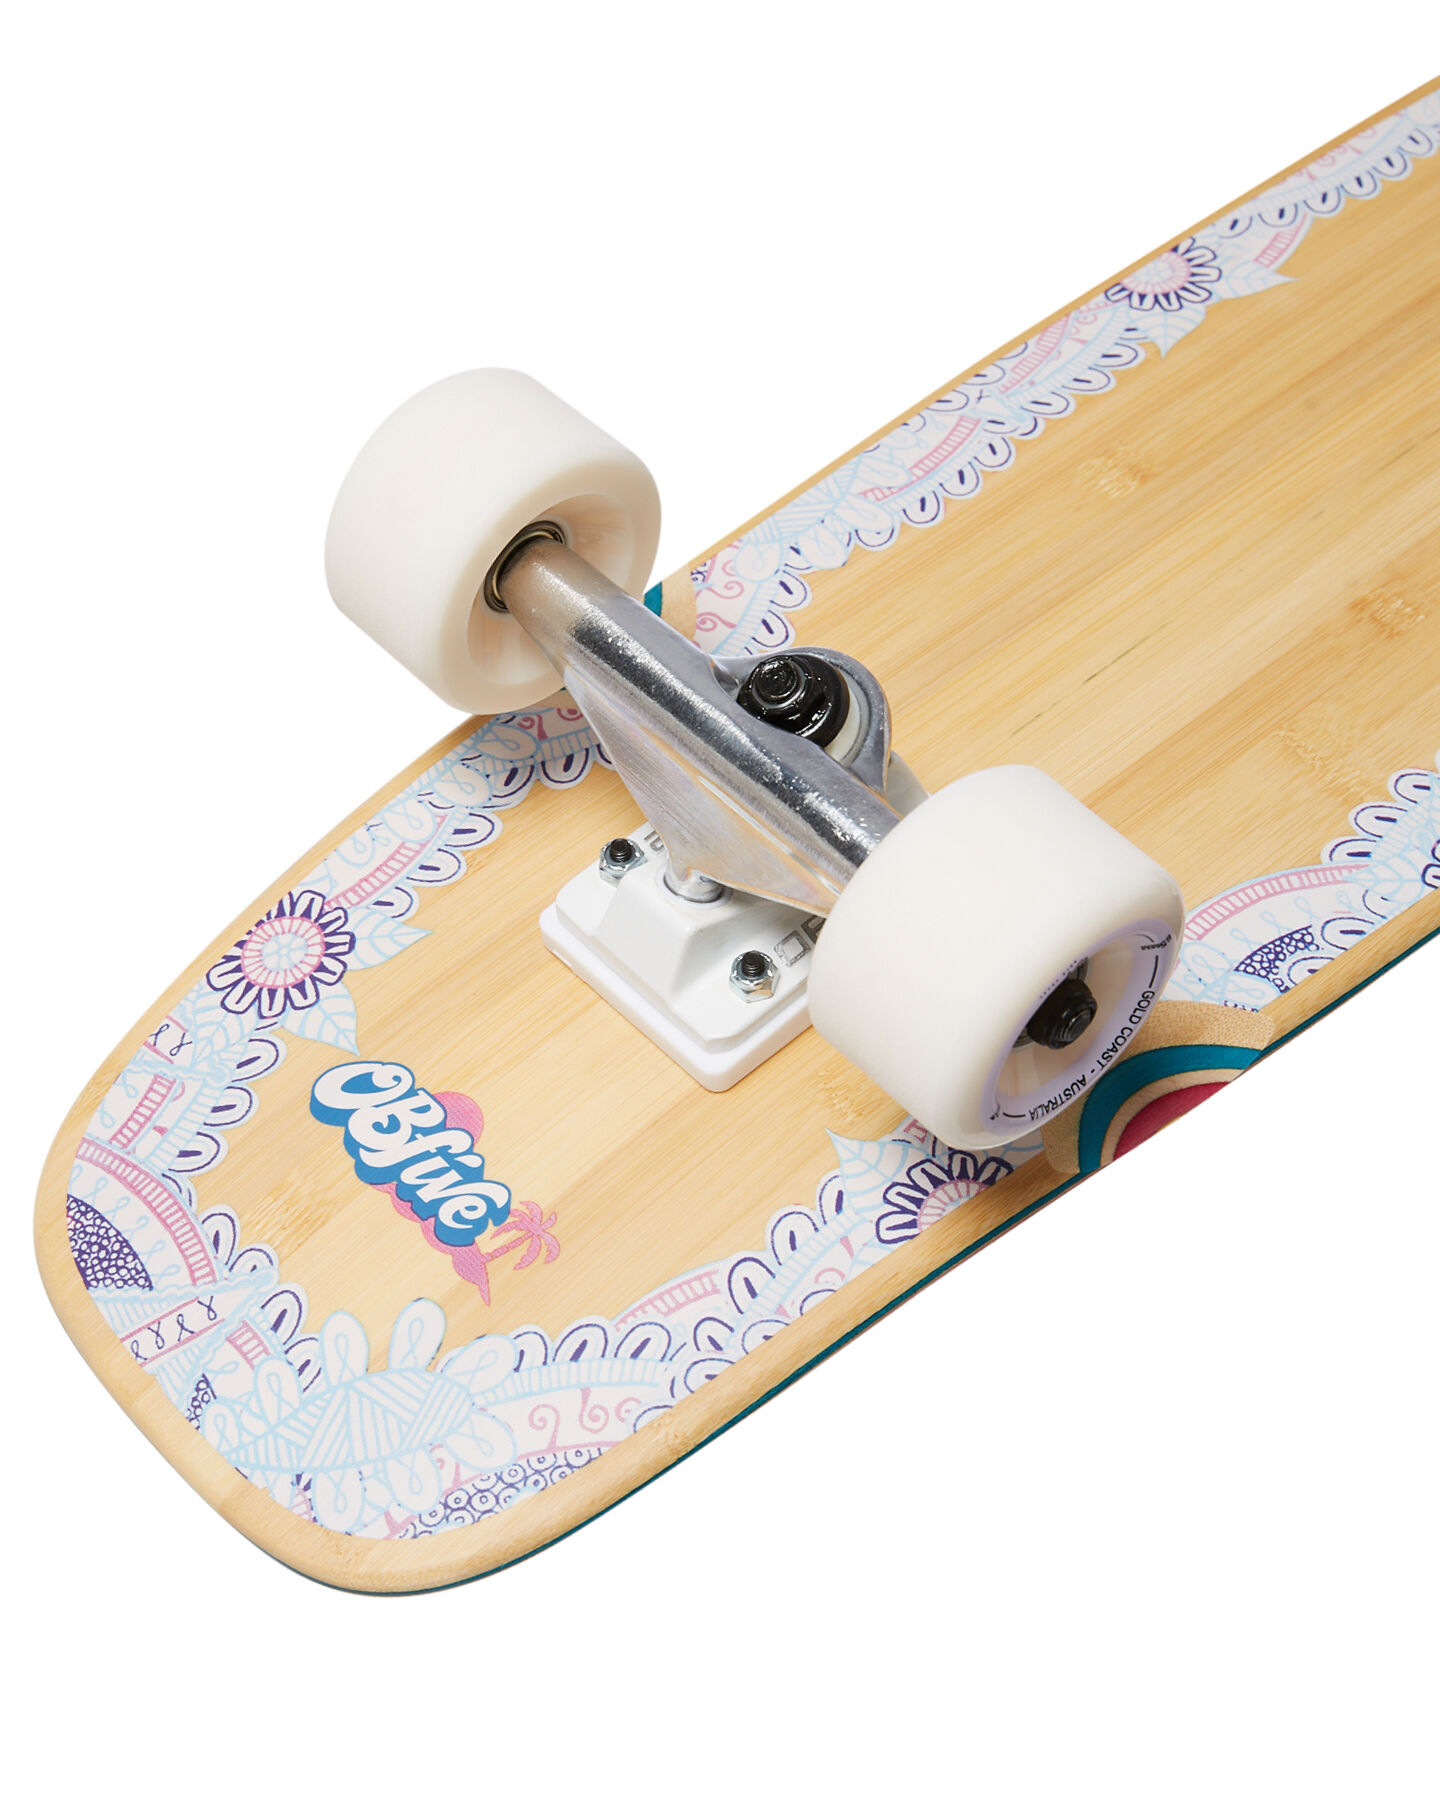 OBFIVE New Collections Em Carey Pastel Crusier 28 Skateboard 2022 in  fashion - storeskate new collection